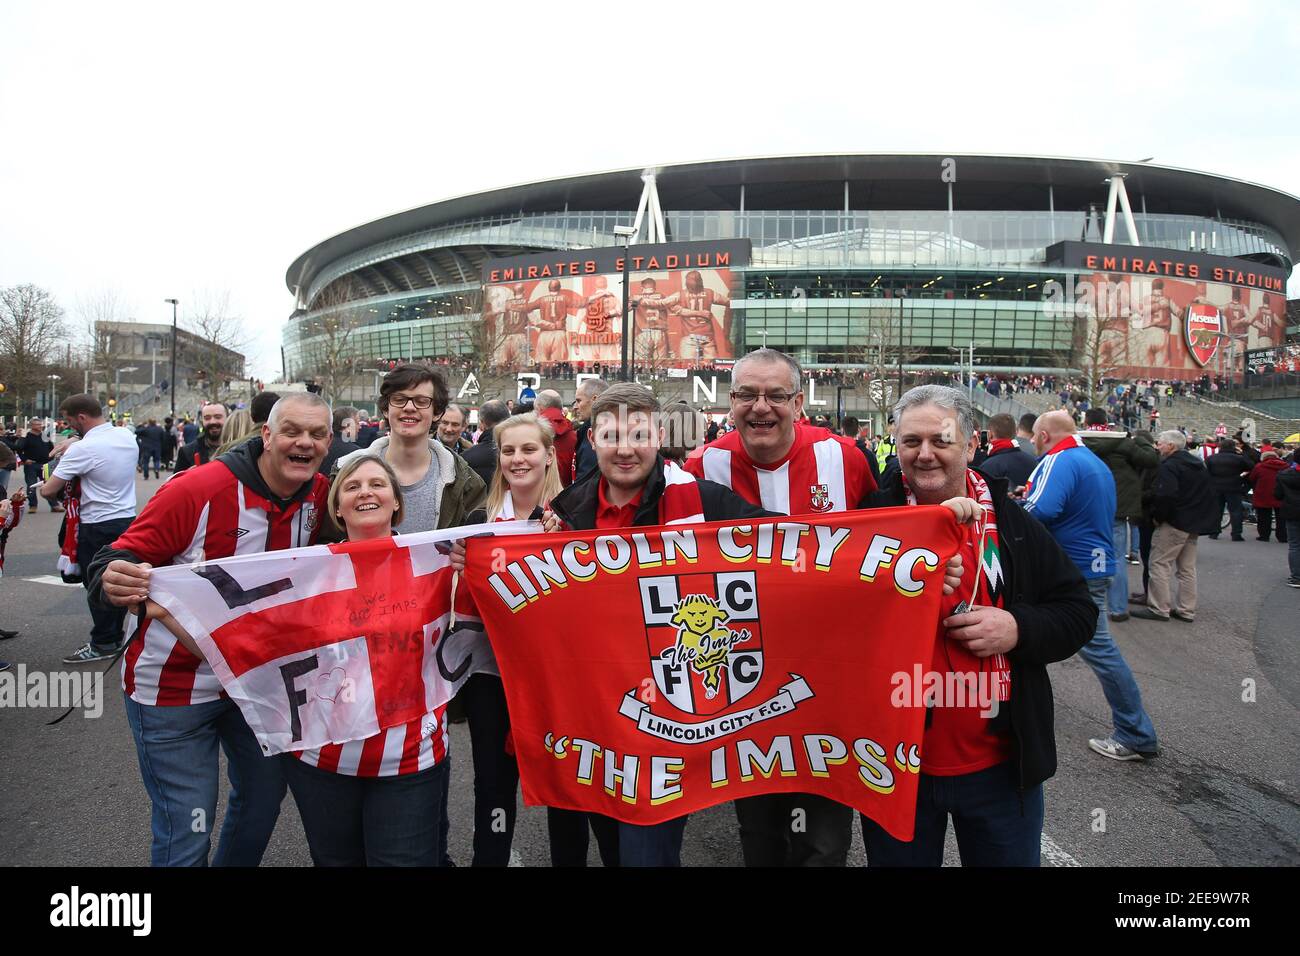 Britain Football Soccer - Arsenal v Lincoln City - FA Cup Quarter Final - The Emirates Stadium - 11/3/17 Lincoln fans pose outside the stadium before the match  Reuters / Paul Hackett Livepic EDITORIAL USE ONLY. No use with unauthorized audio, video, data, fixture lists, club/league logos or 'live' services. Online in-match use limited to 45 images, no video emulation. No use in betting, games or single club/league/player publications.  Please contact your account representative for further details. Stock Photo